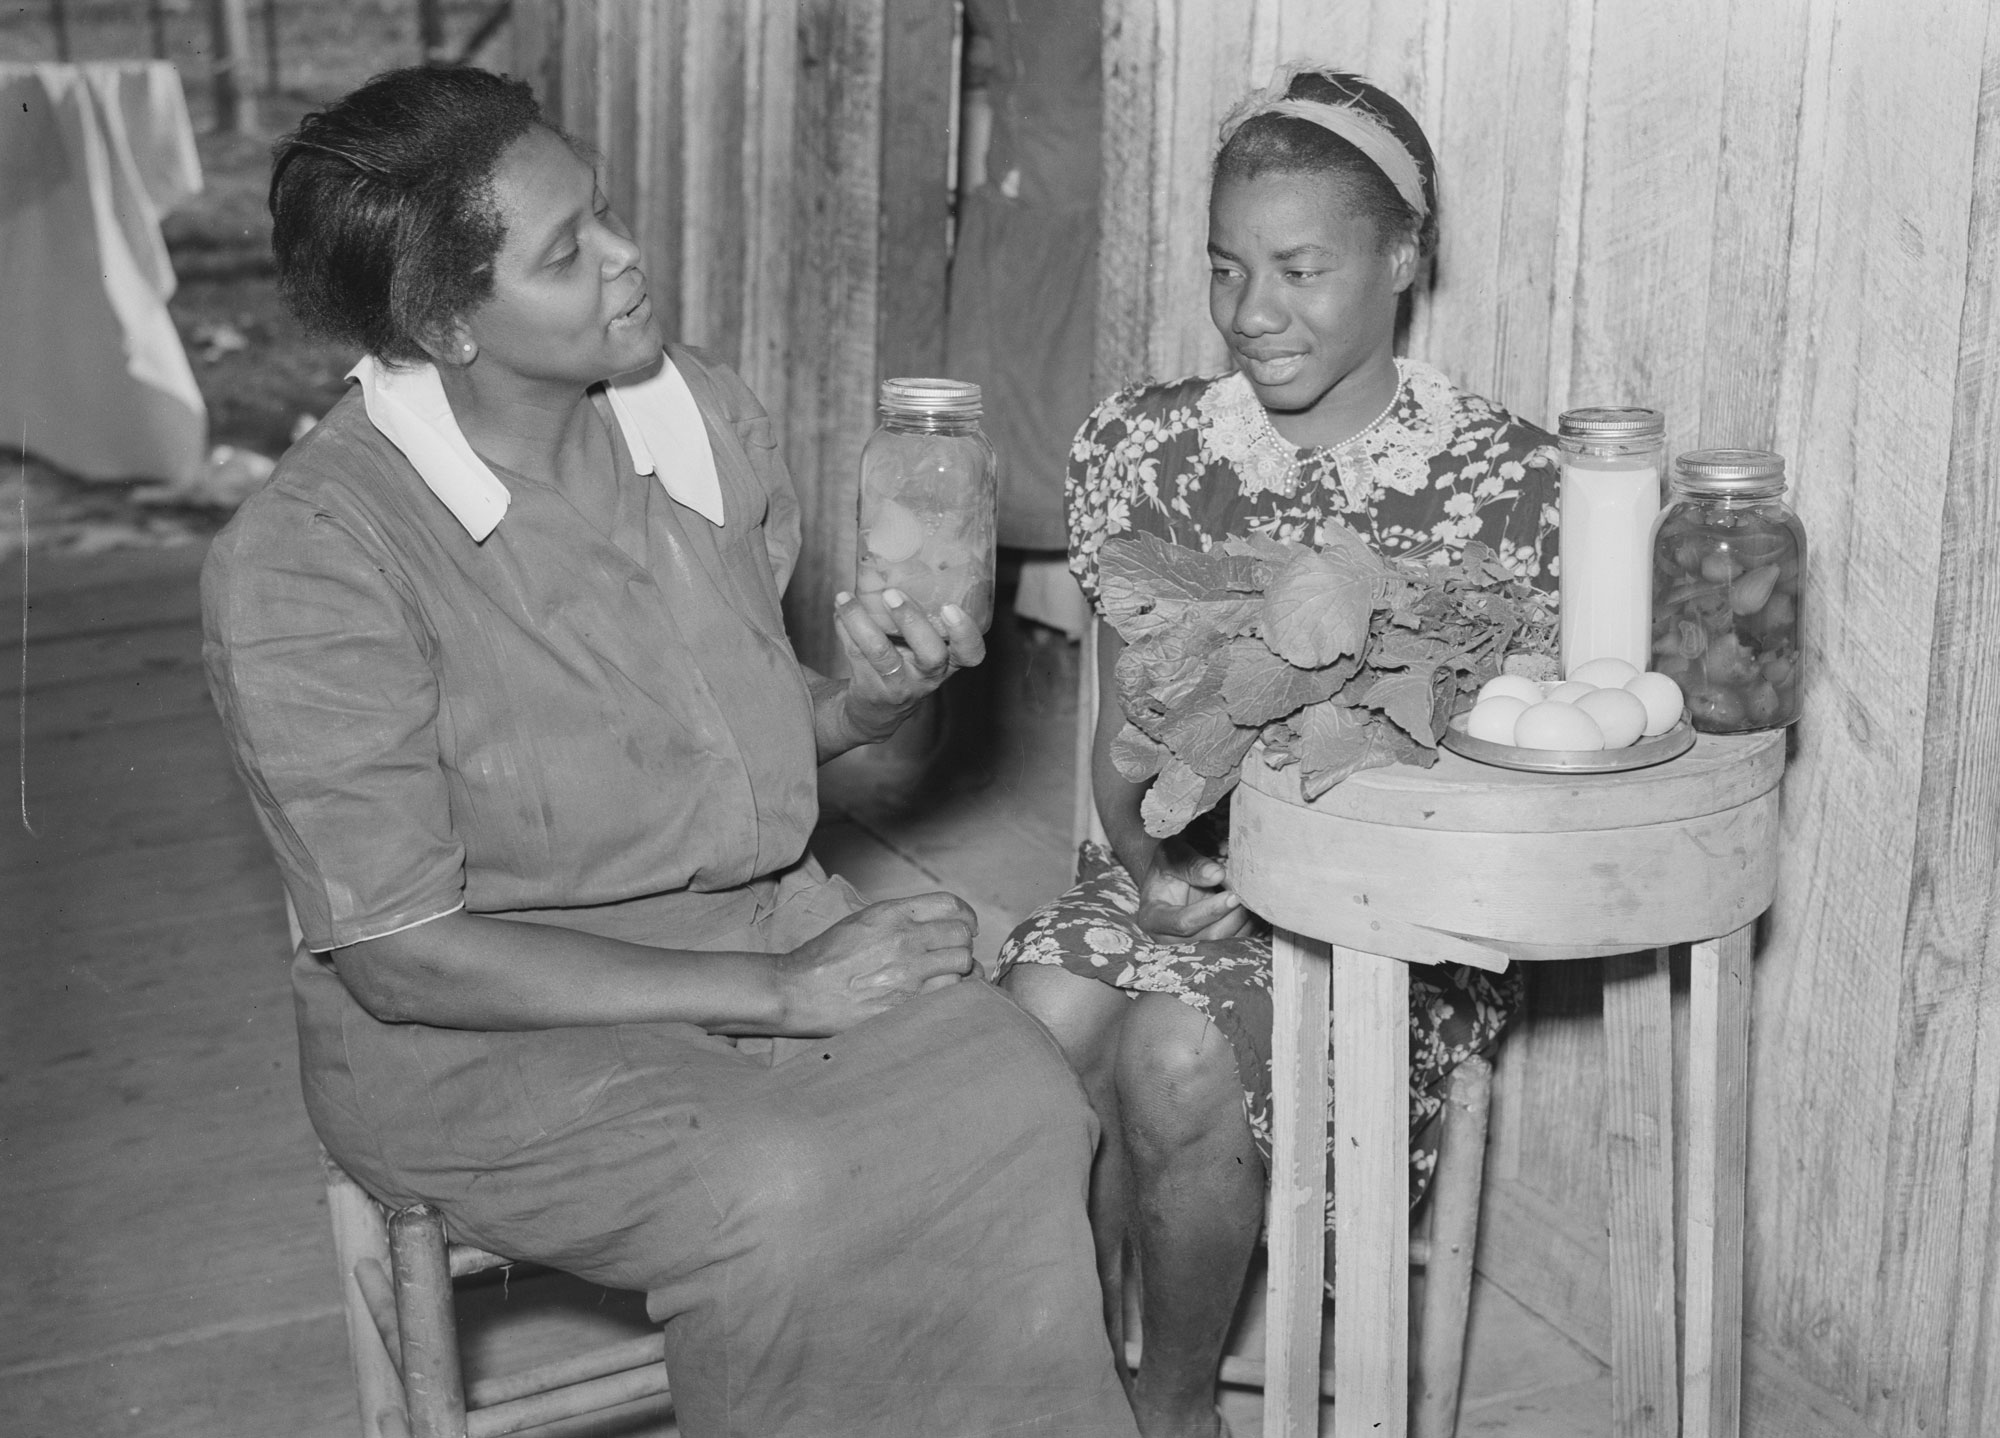 Black-and-white photograph of two women sitting at a small table. The woman on the left sits in a chair and holds of a jar of food while speaking to the other woman. The woman on the right sits on a chair placed against a wall and behind the small table. Greens, eggs, a jar of milk, and another jar of food sit on the table.